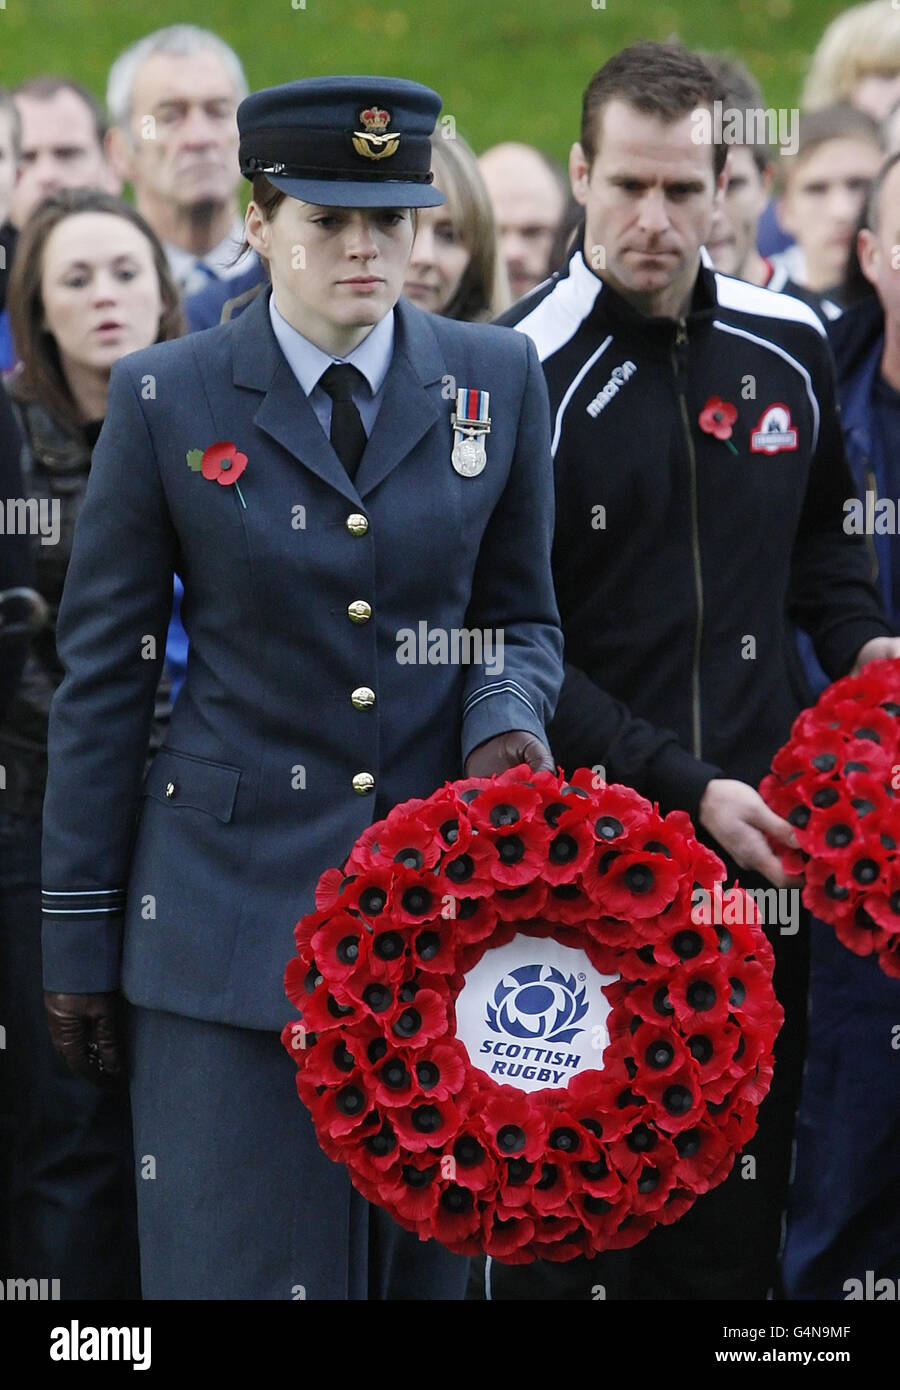 Rugby Union - Scotland Womens Squad at the Remembrance Service - Memorial Arch - Murrayfield. Scotland Woman's international and RAF Flt Lt Katherine Muir during the remembrance service at the Memorial Arch, Murrayfield, Edinburgh. Stock Photo